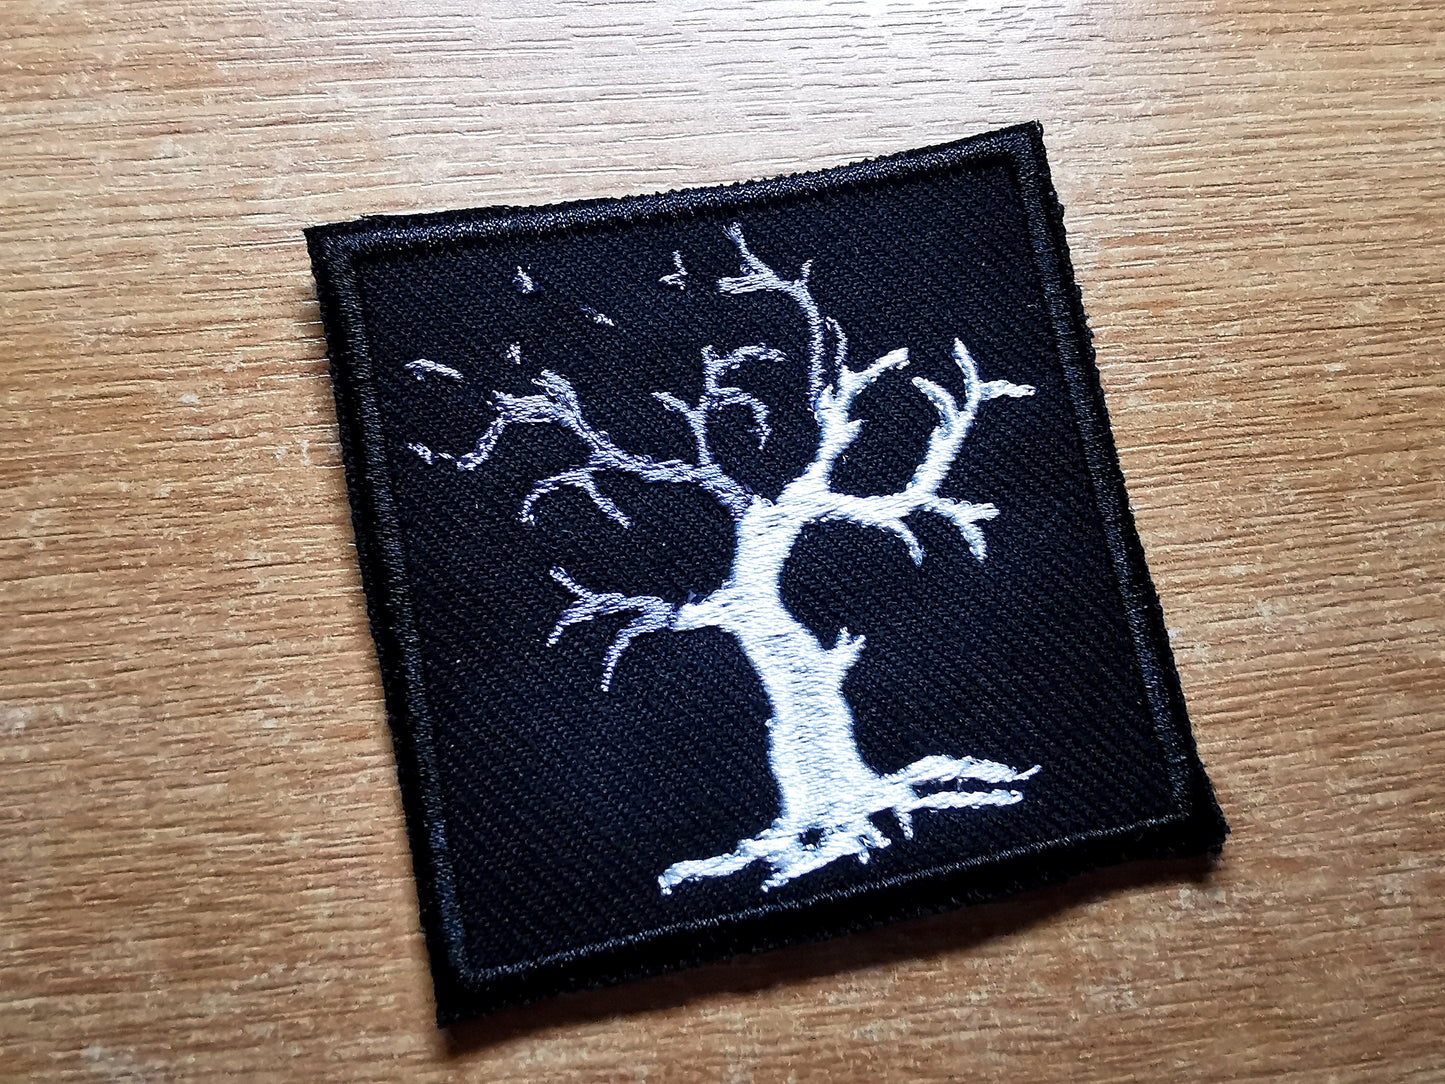 Dead tree Half Ash Embroidered Iron On Patch Gothic Black Metal Nature Oak